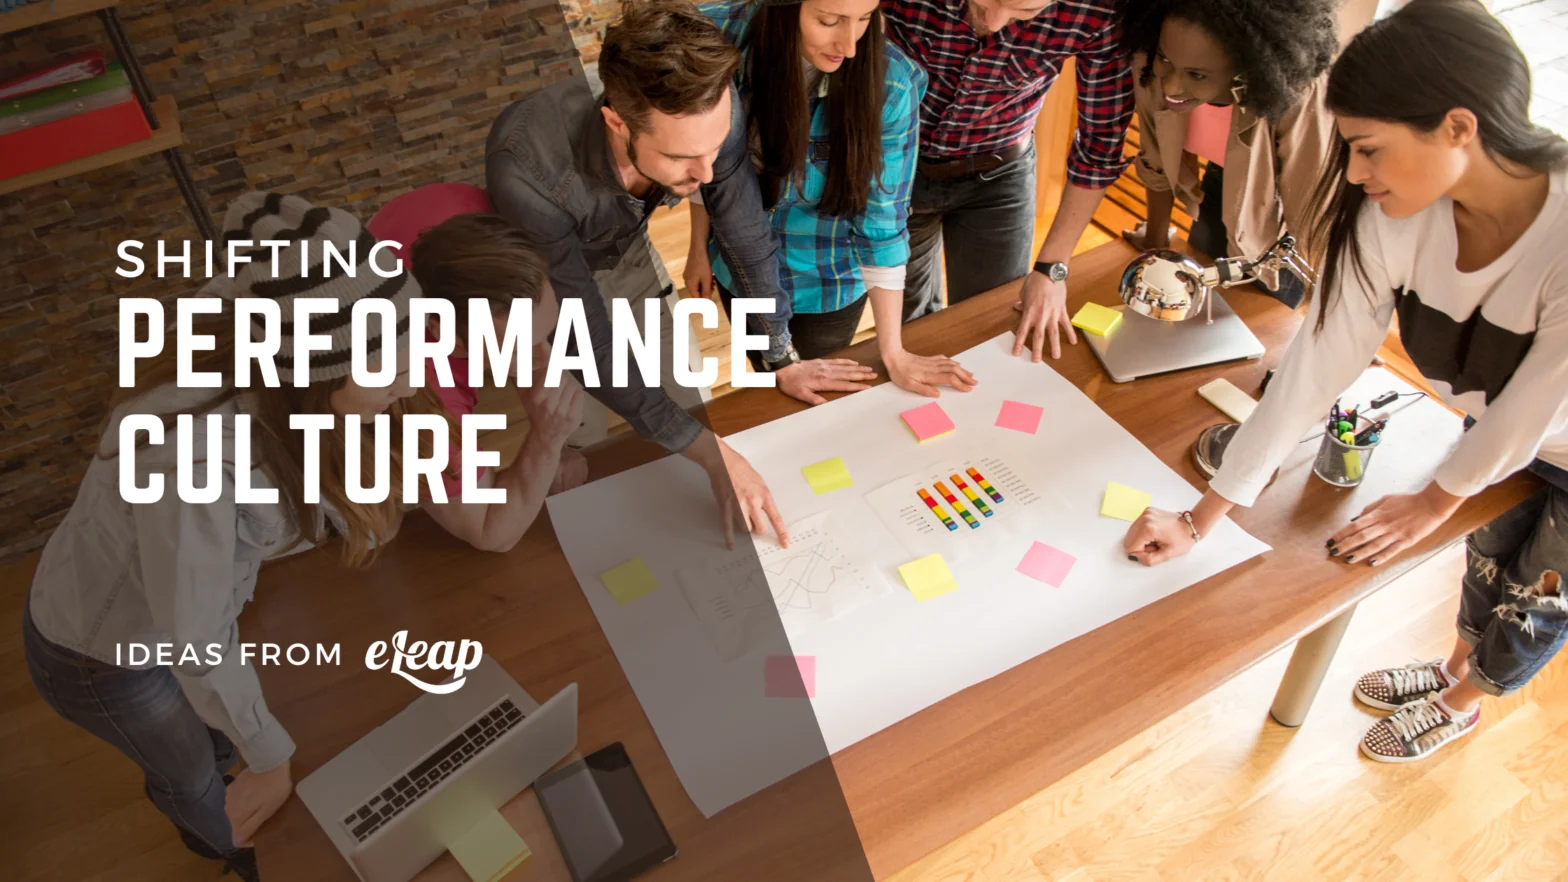 Shifting to a Performance Culture: Why Culture Should Be Part of Performance Management